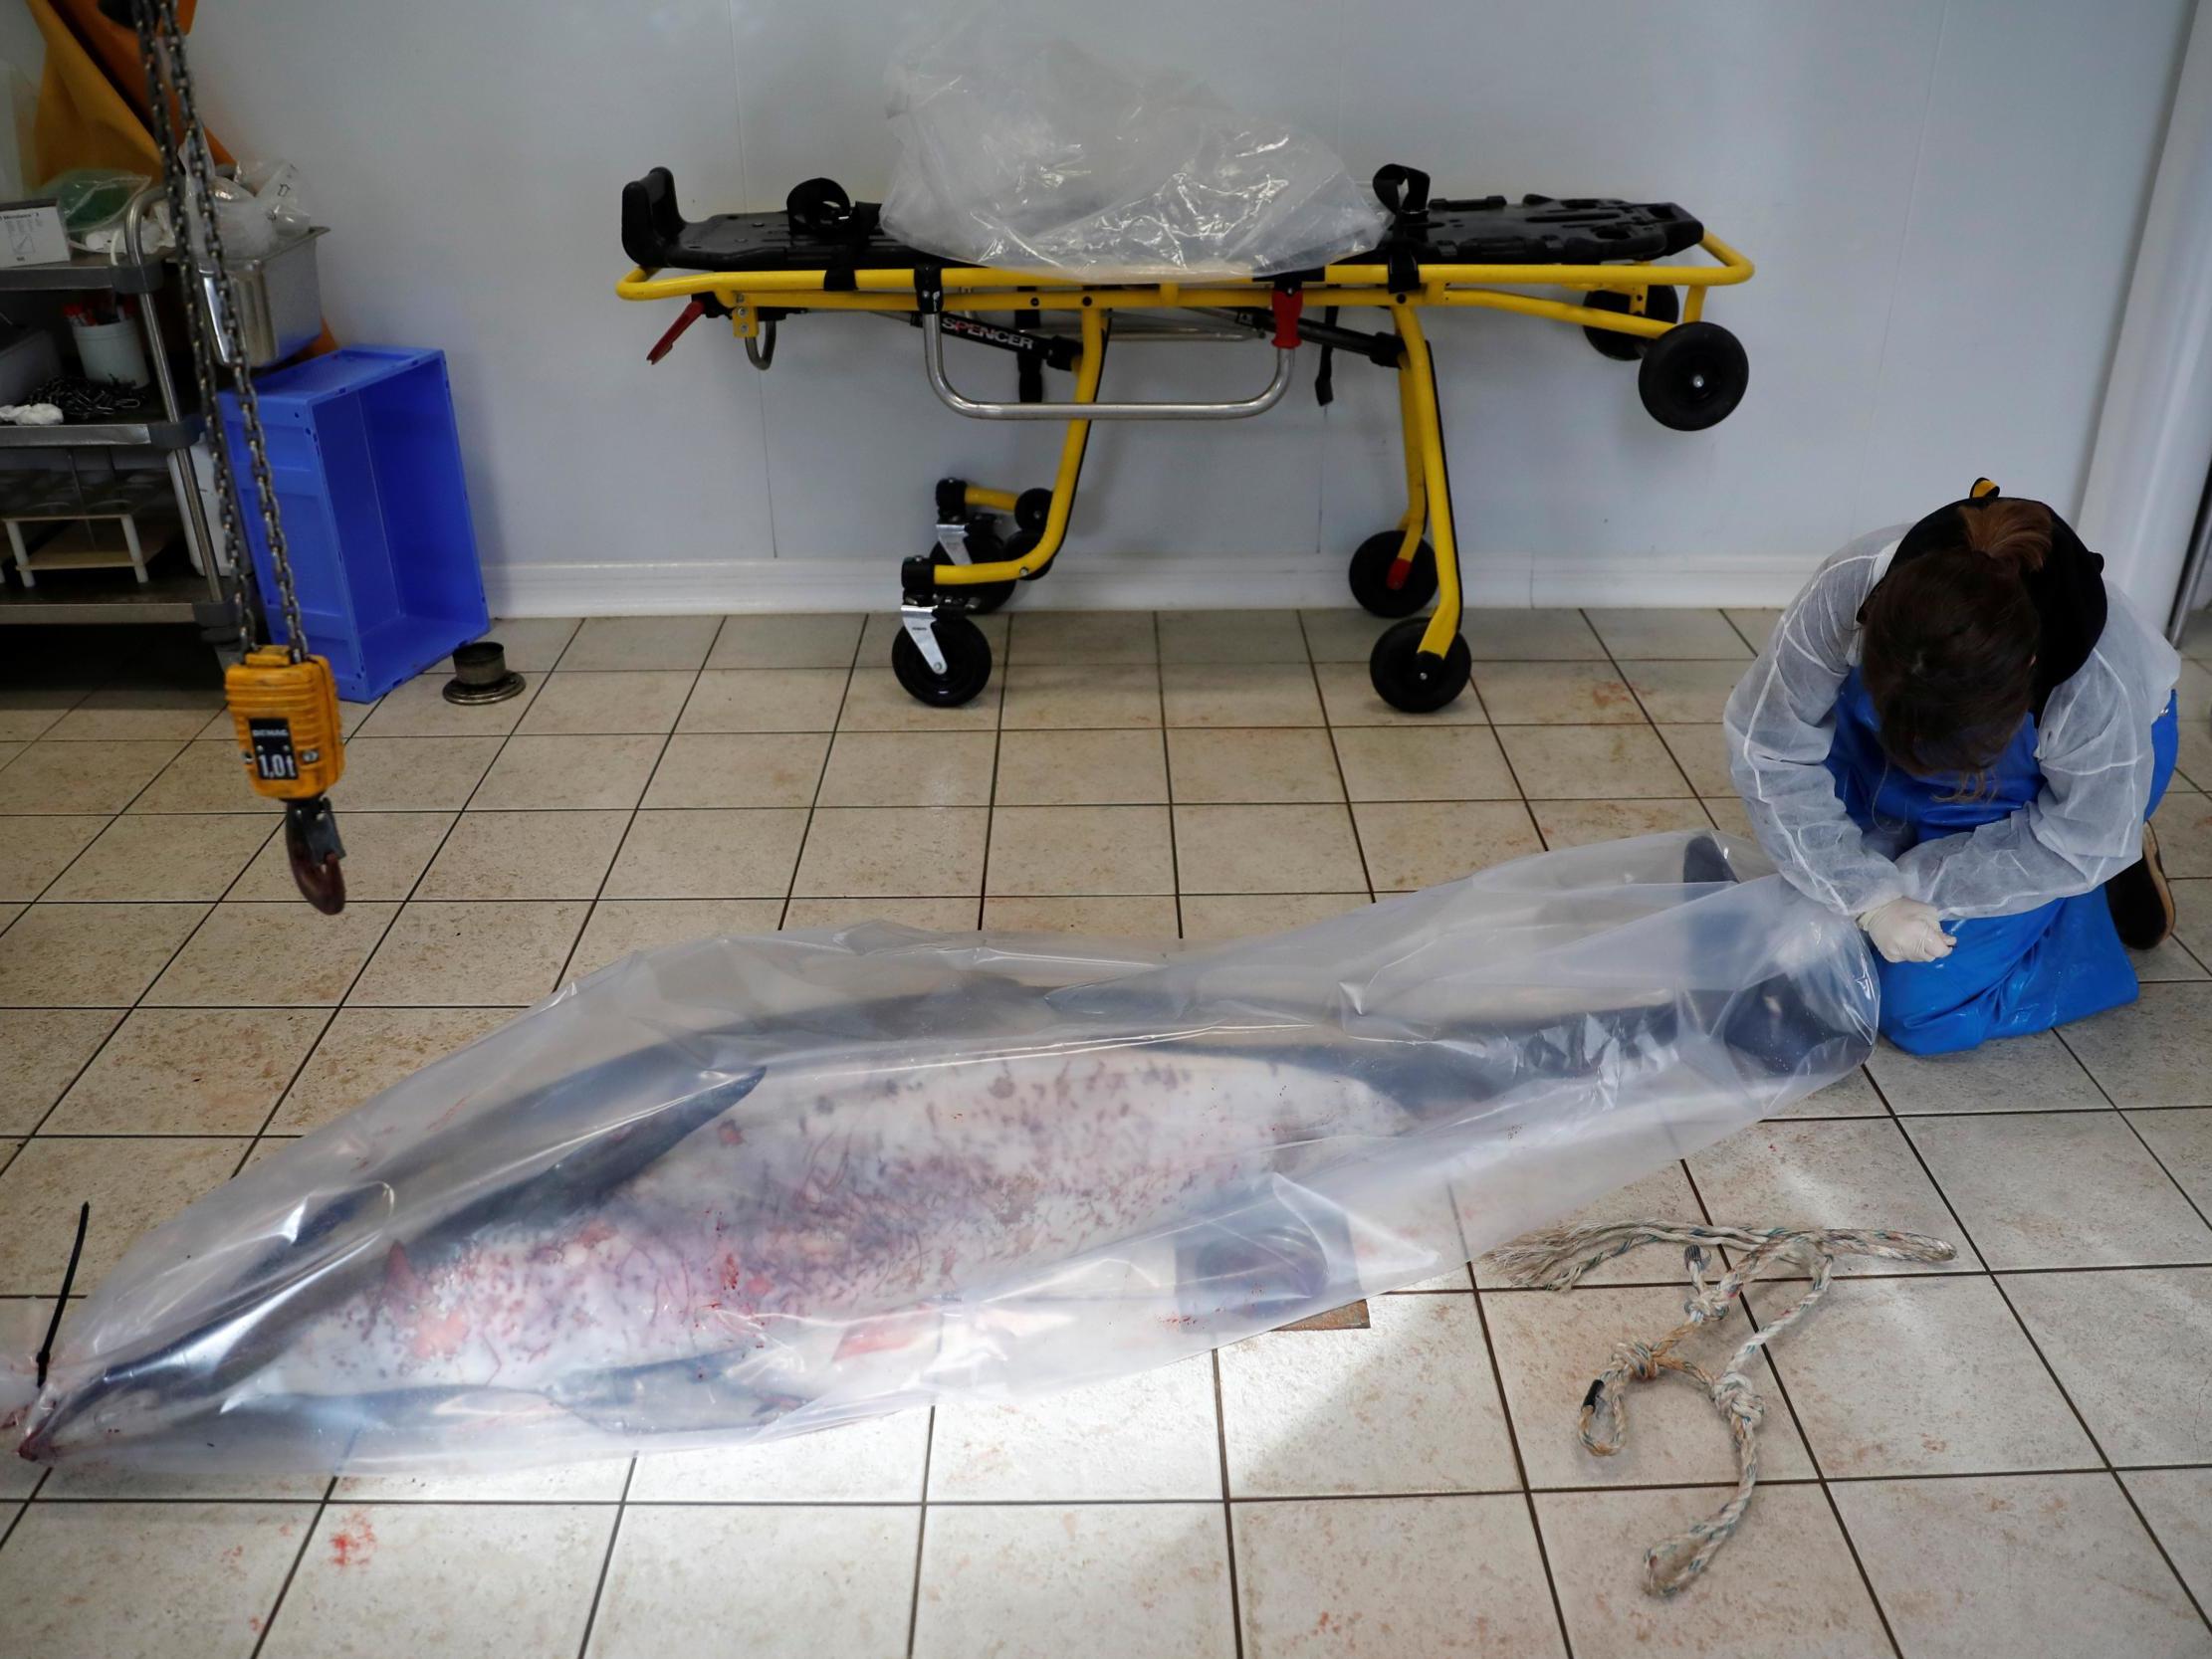 An expert at the Observatoire Pelagis packs in a bag the body of a dolphin, which was found dead on a beach, in a cold room at their marine research station in La Rochelle, France